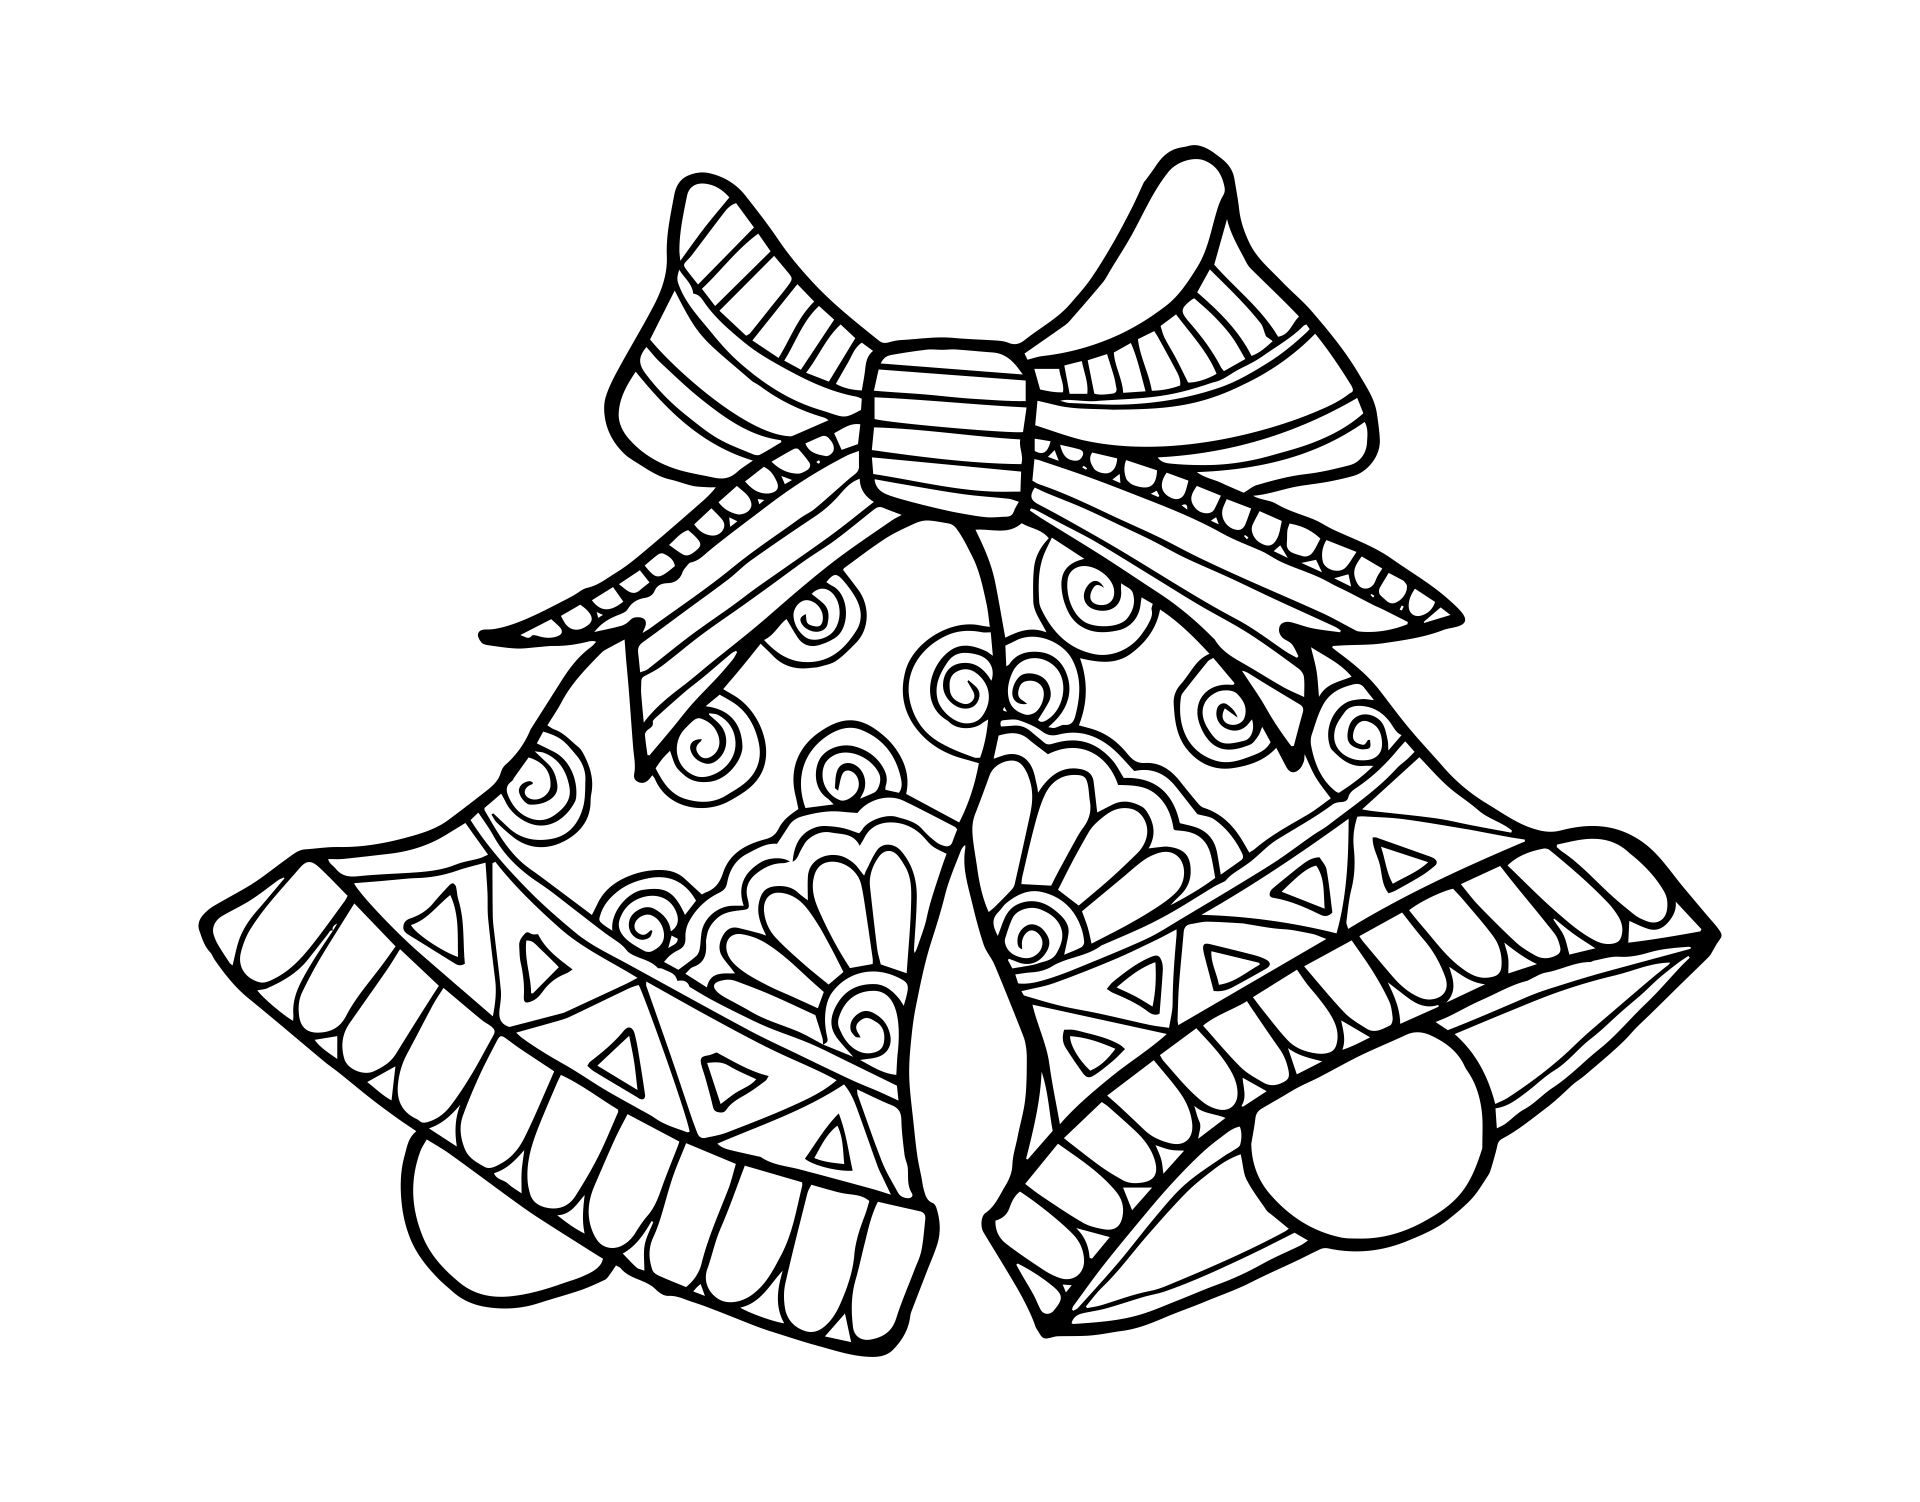 Printable Christmas Ornaments Adult Coloring Pages